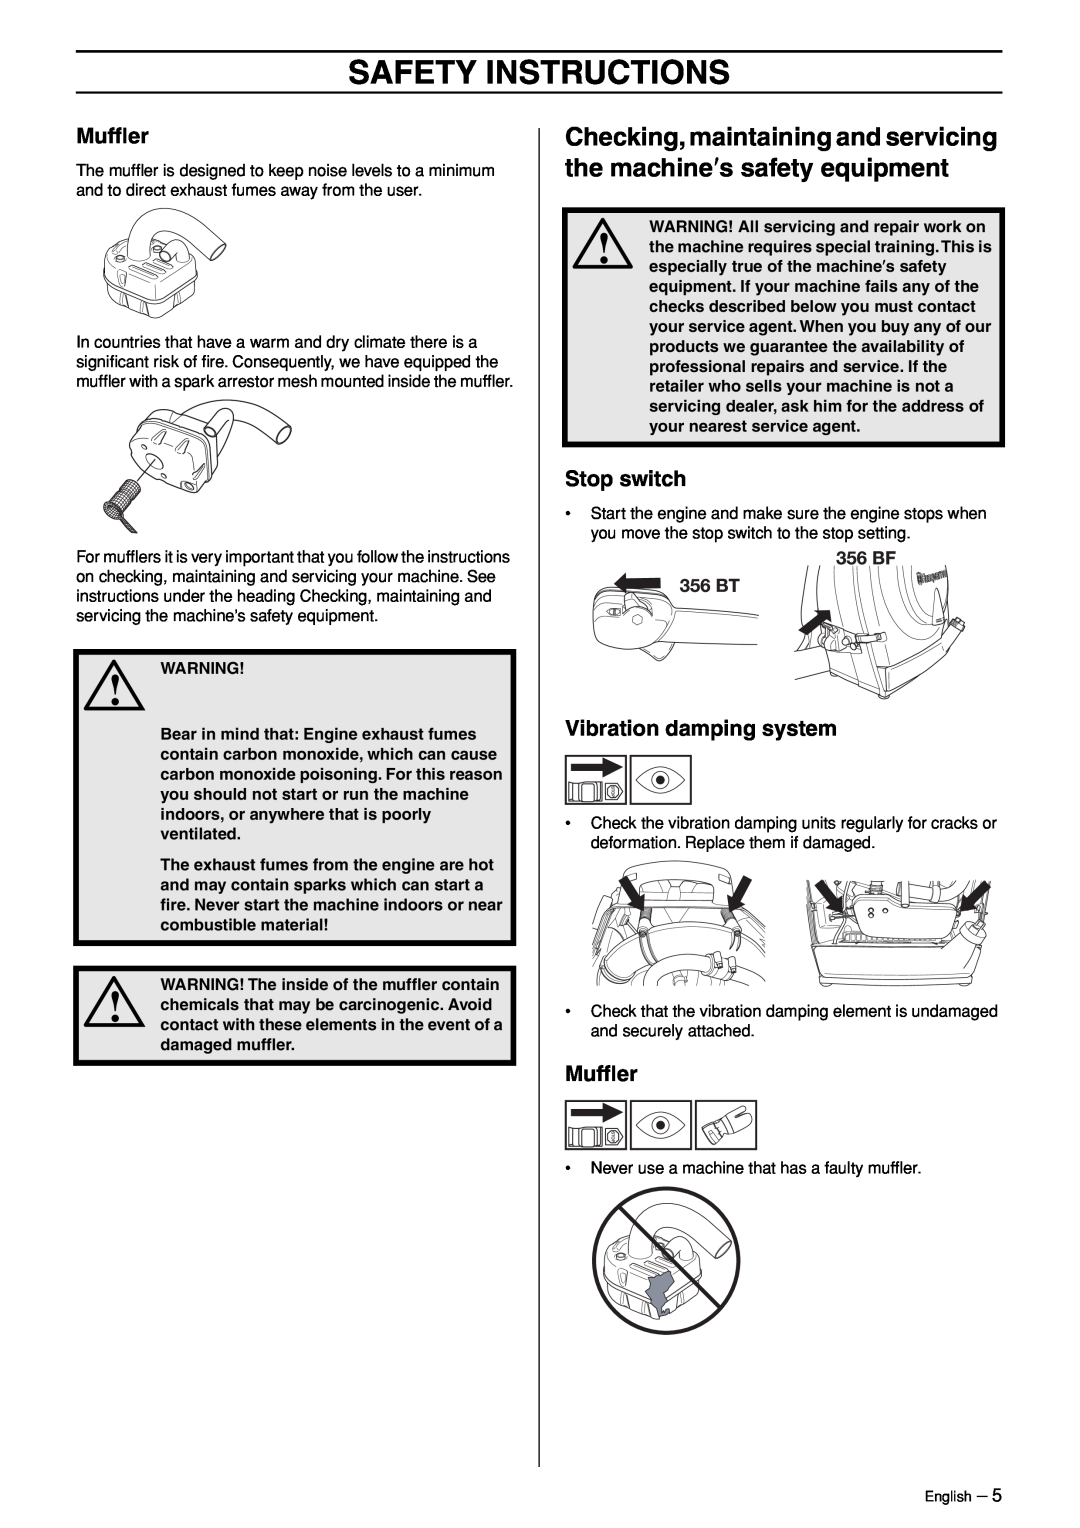 Husqvarna 356BT manual Checking, maintaining and servicing the machine′s safety equipment, Mufﬂer, Safety Instructions 